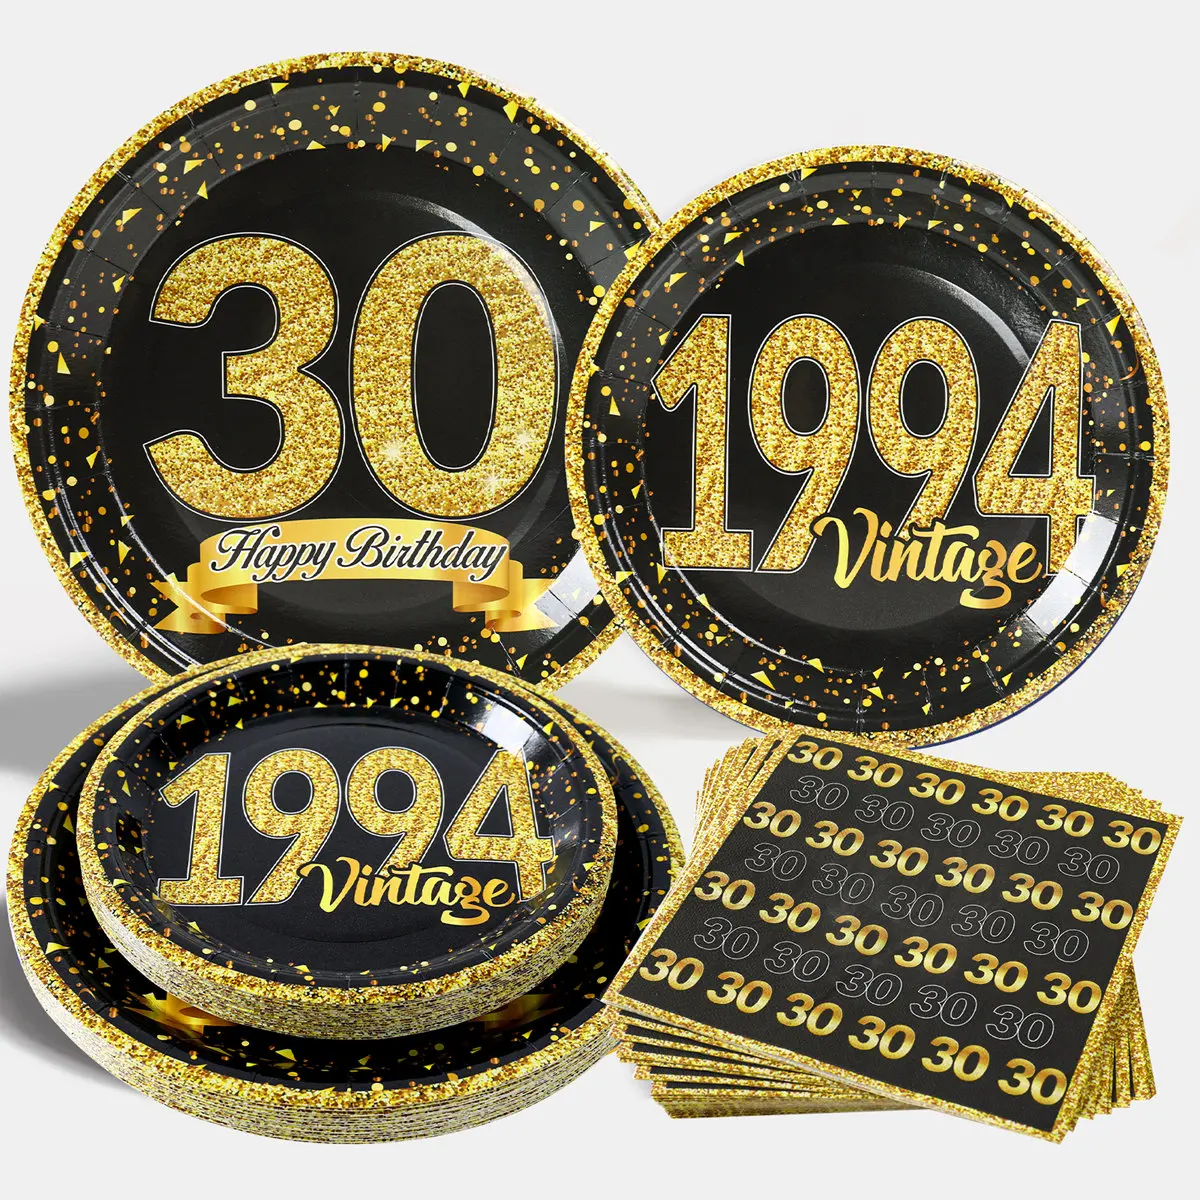 

30 40 50 Birthday Party Adult Anniversary Decor Paper Plate Cup Tablecloth 30th 40th 50th 60th Happy Birthday Party Decorations